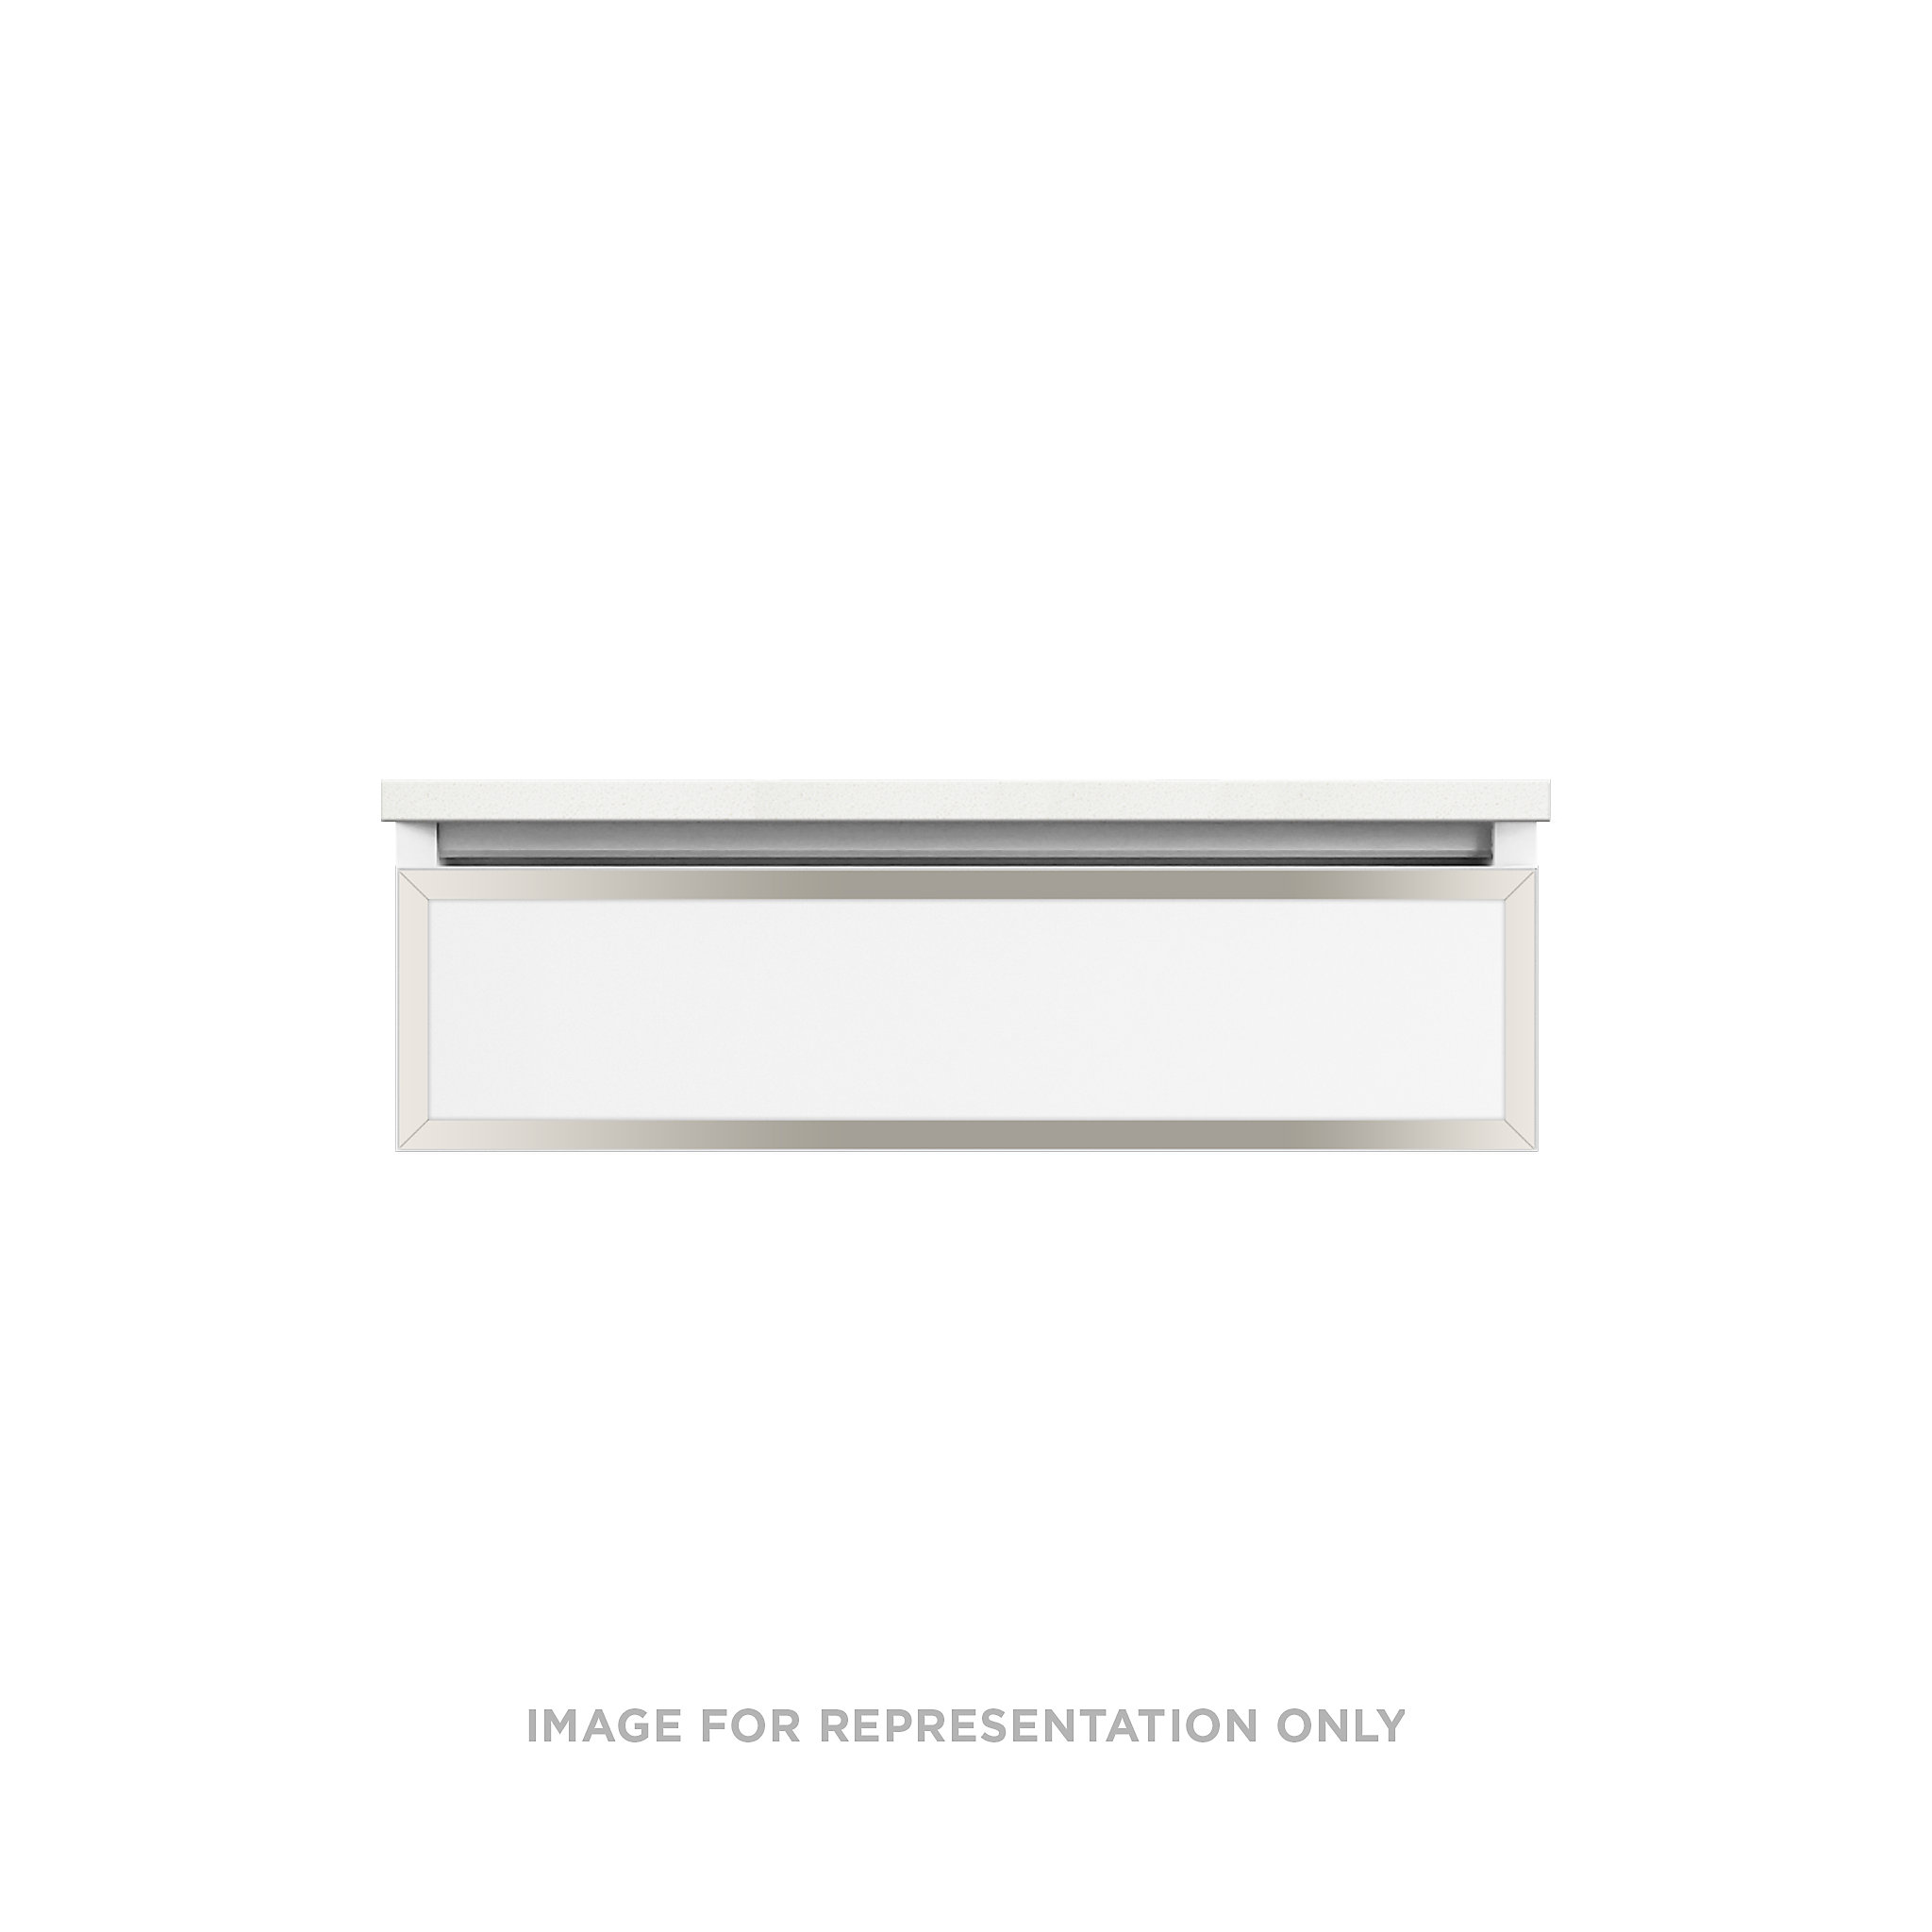 Robern VP30H1D21T11N77 Profiles Framed Vanity, 30" x 7-1/2" x 21", Tinted Gray Mirror, Polished Nickel Frame, Tip Out Drawer